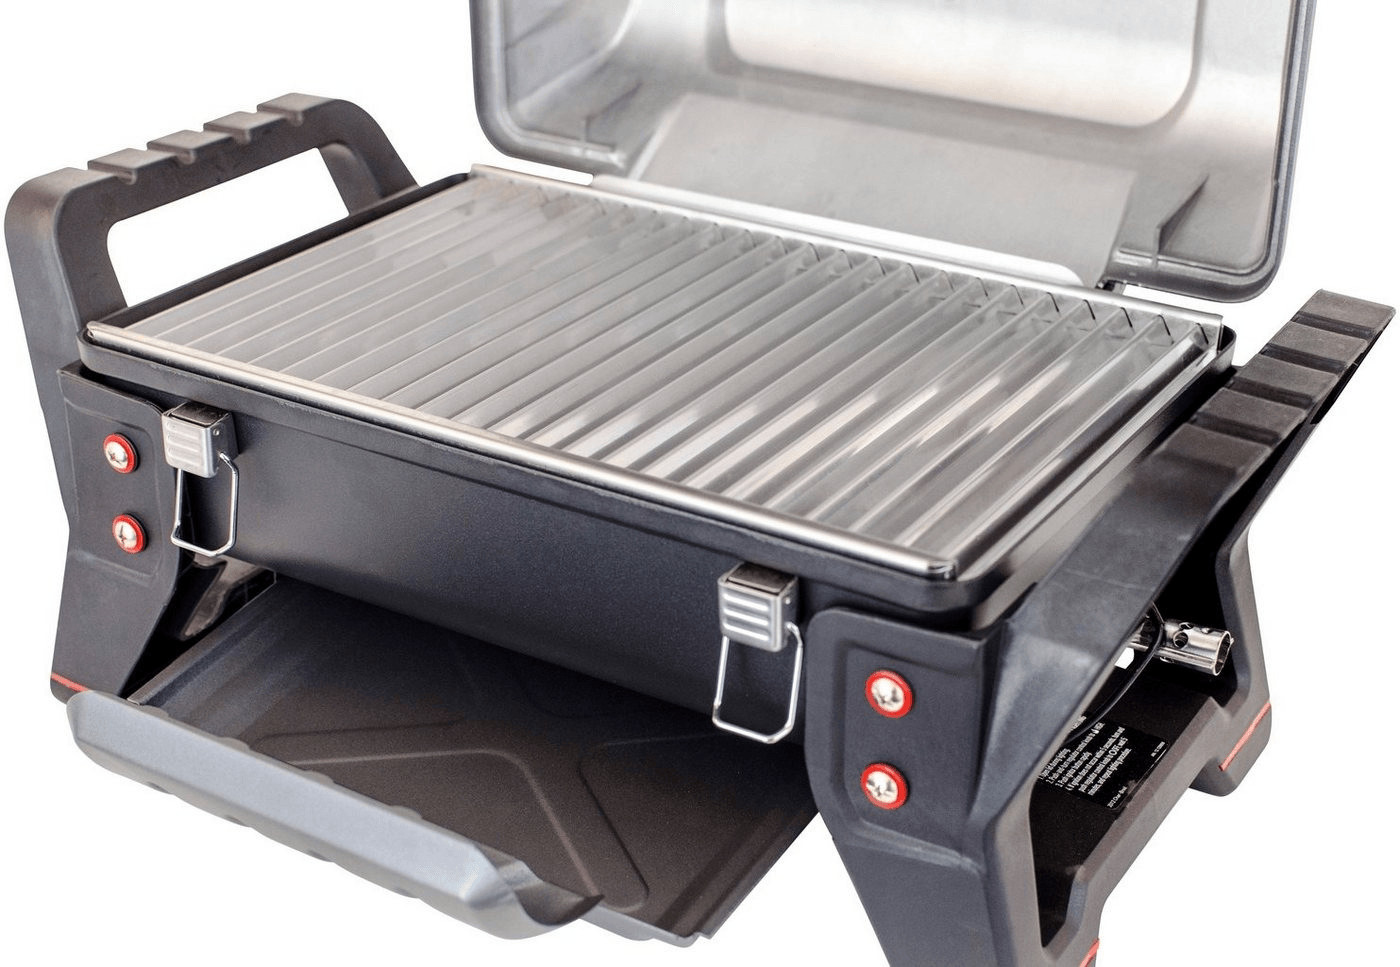 Buy Char-Broil X200 Grill2Go from Â£159.99 (Today) â Best Deals on idealo.co.uk